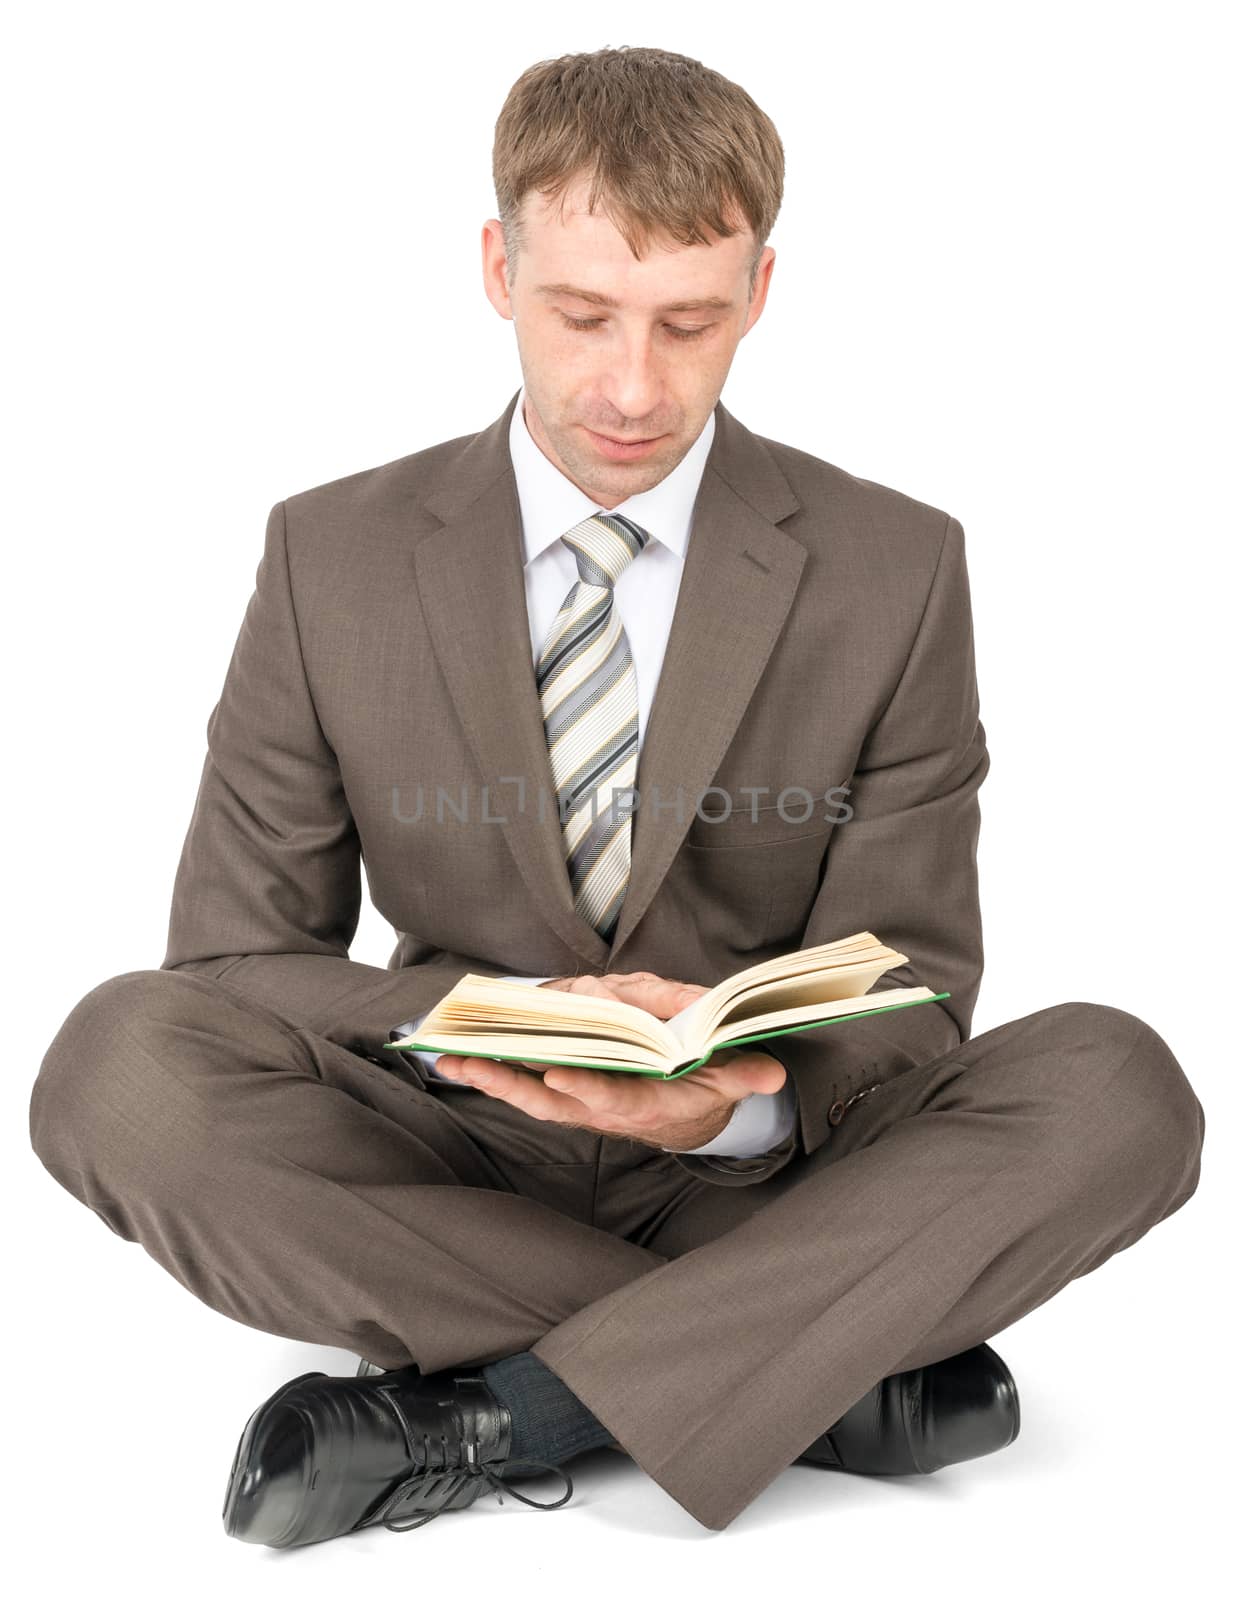 Man sitting and reading book isolated on white background